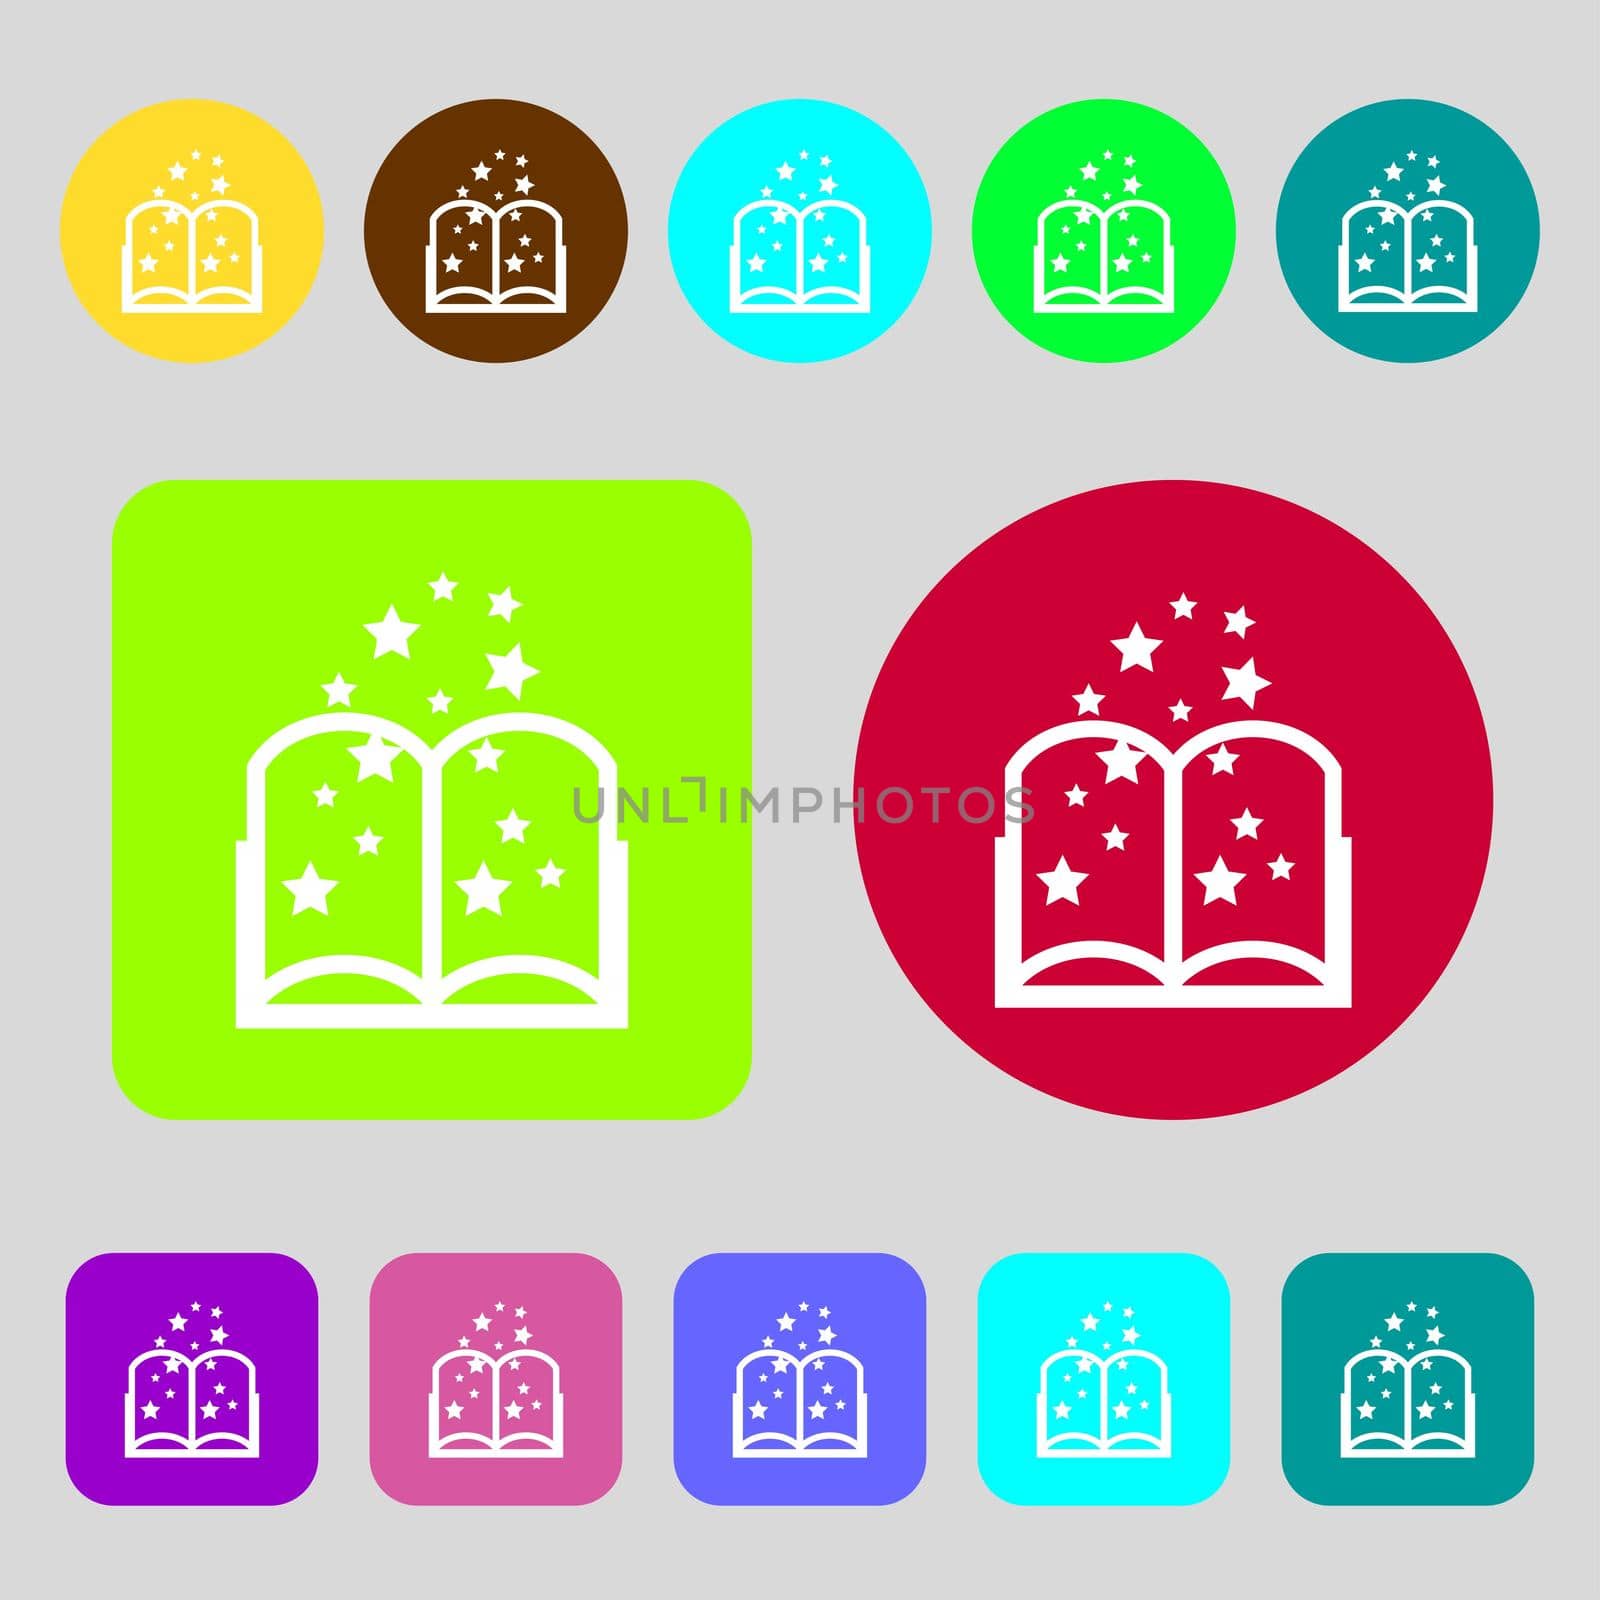 Magic Book sign icon. Open book symbol. 12 colored buttons. Flat design.  by serhii_lohvyniuk